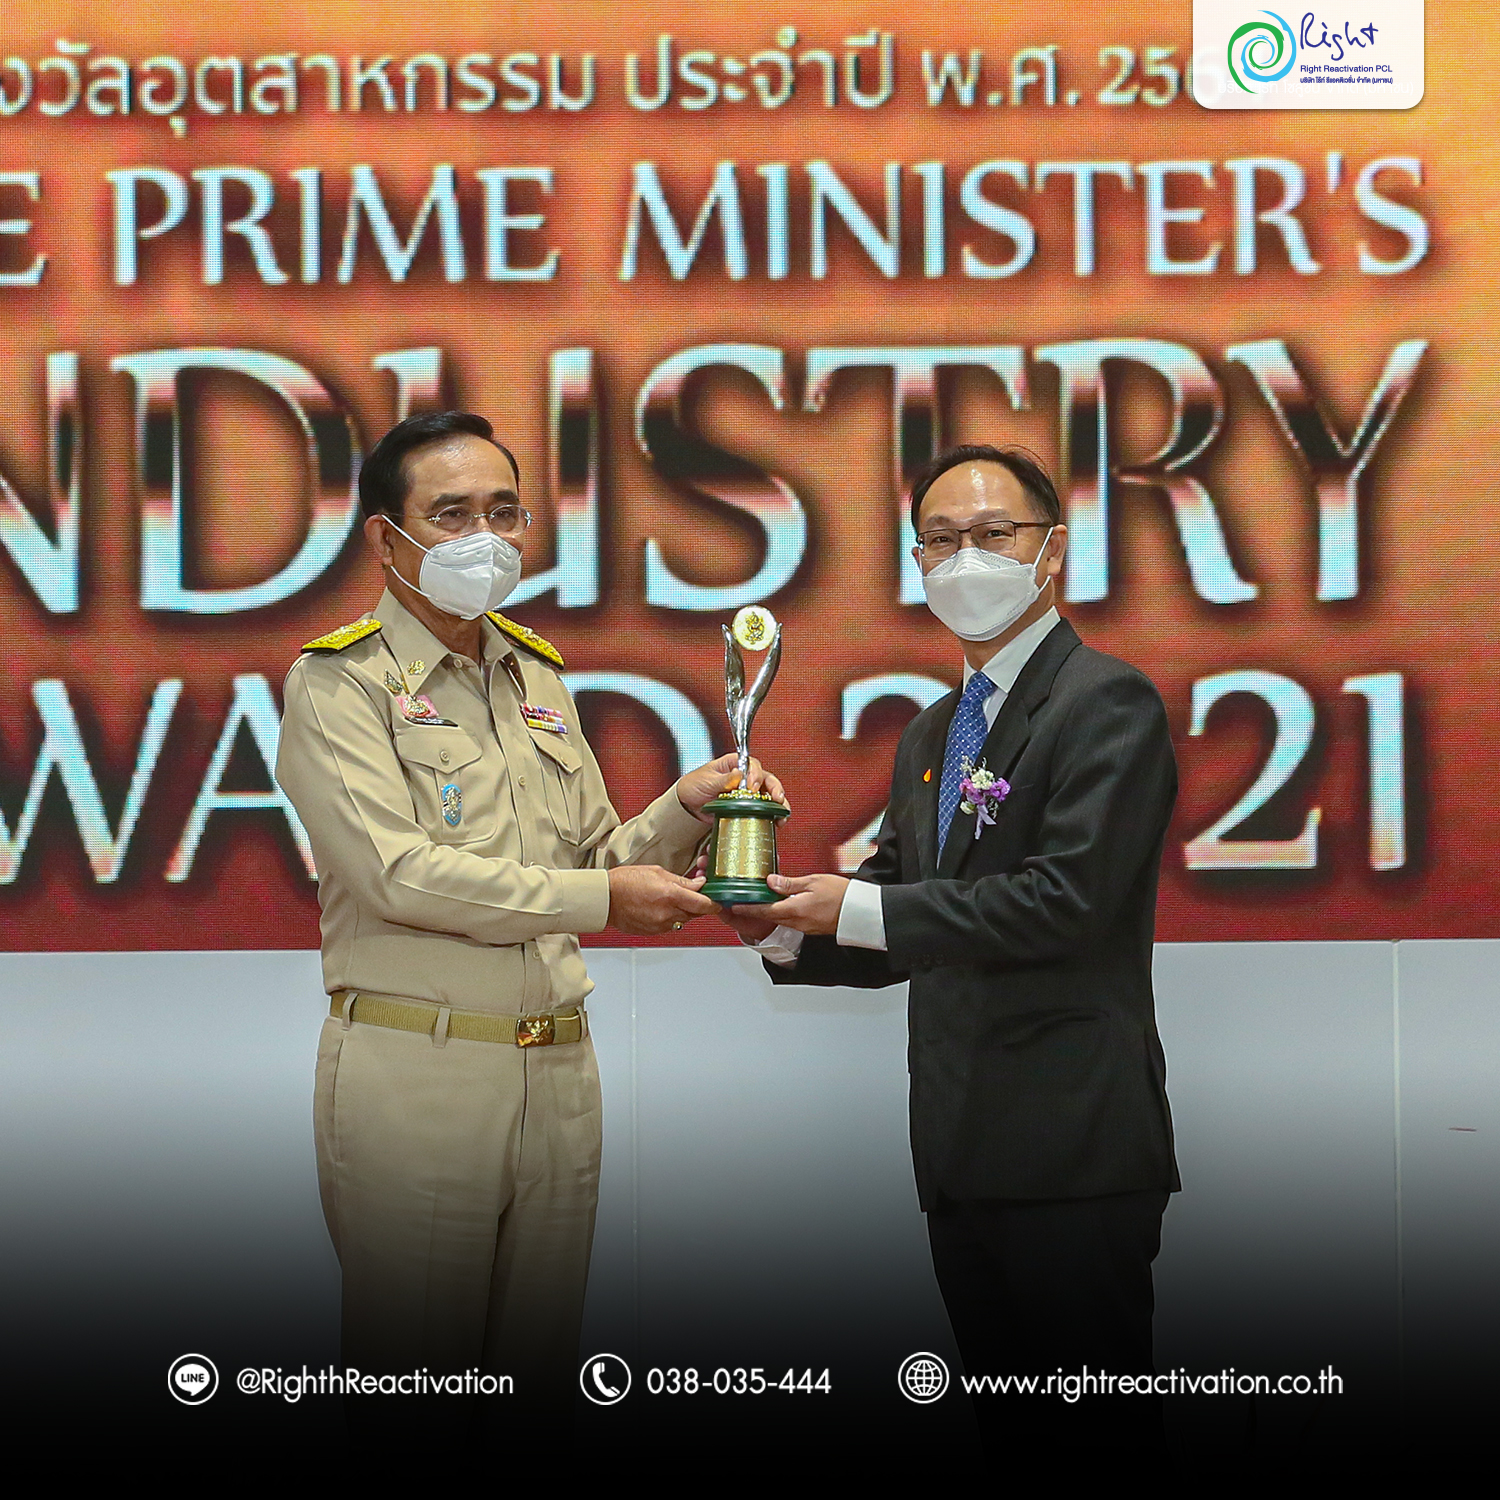 THE PRIME MINISTER'S INDUSTRY AWARD 2021